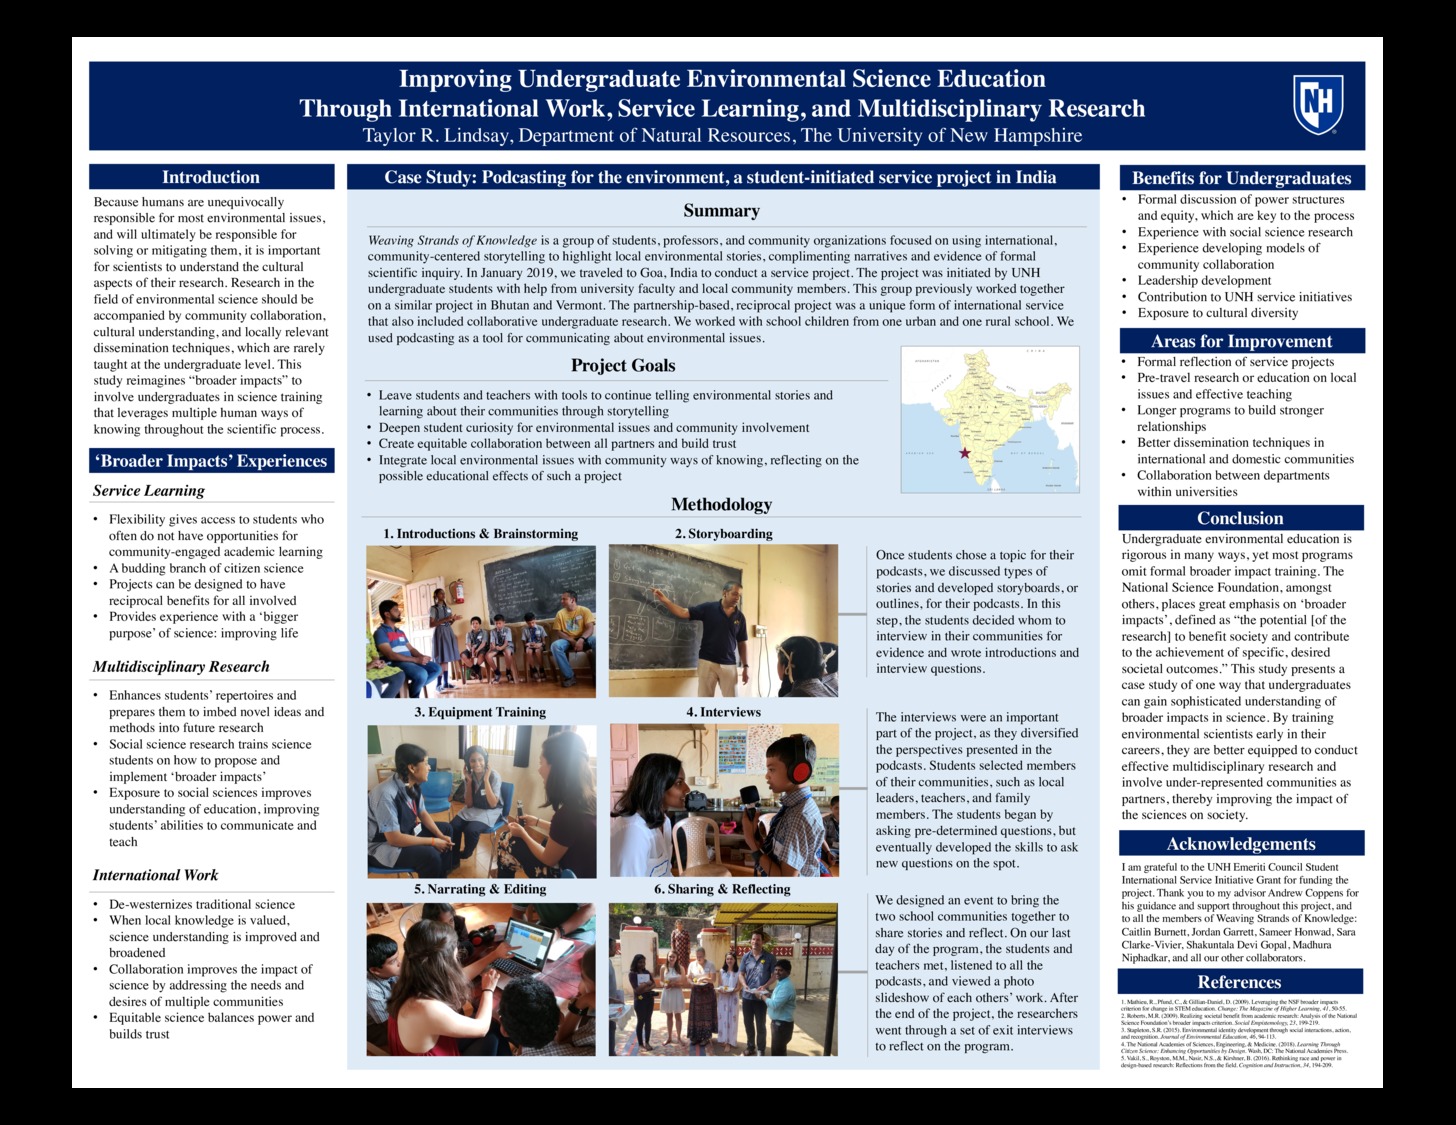 Improving Undergraduate Environmental Science Education Through International Work, Service Learning, And Multidisciplinary Research by trl1004